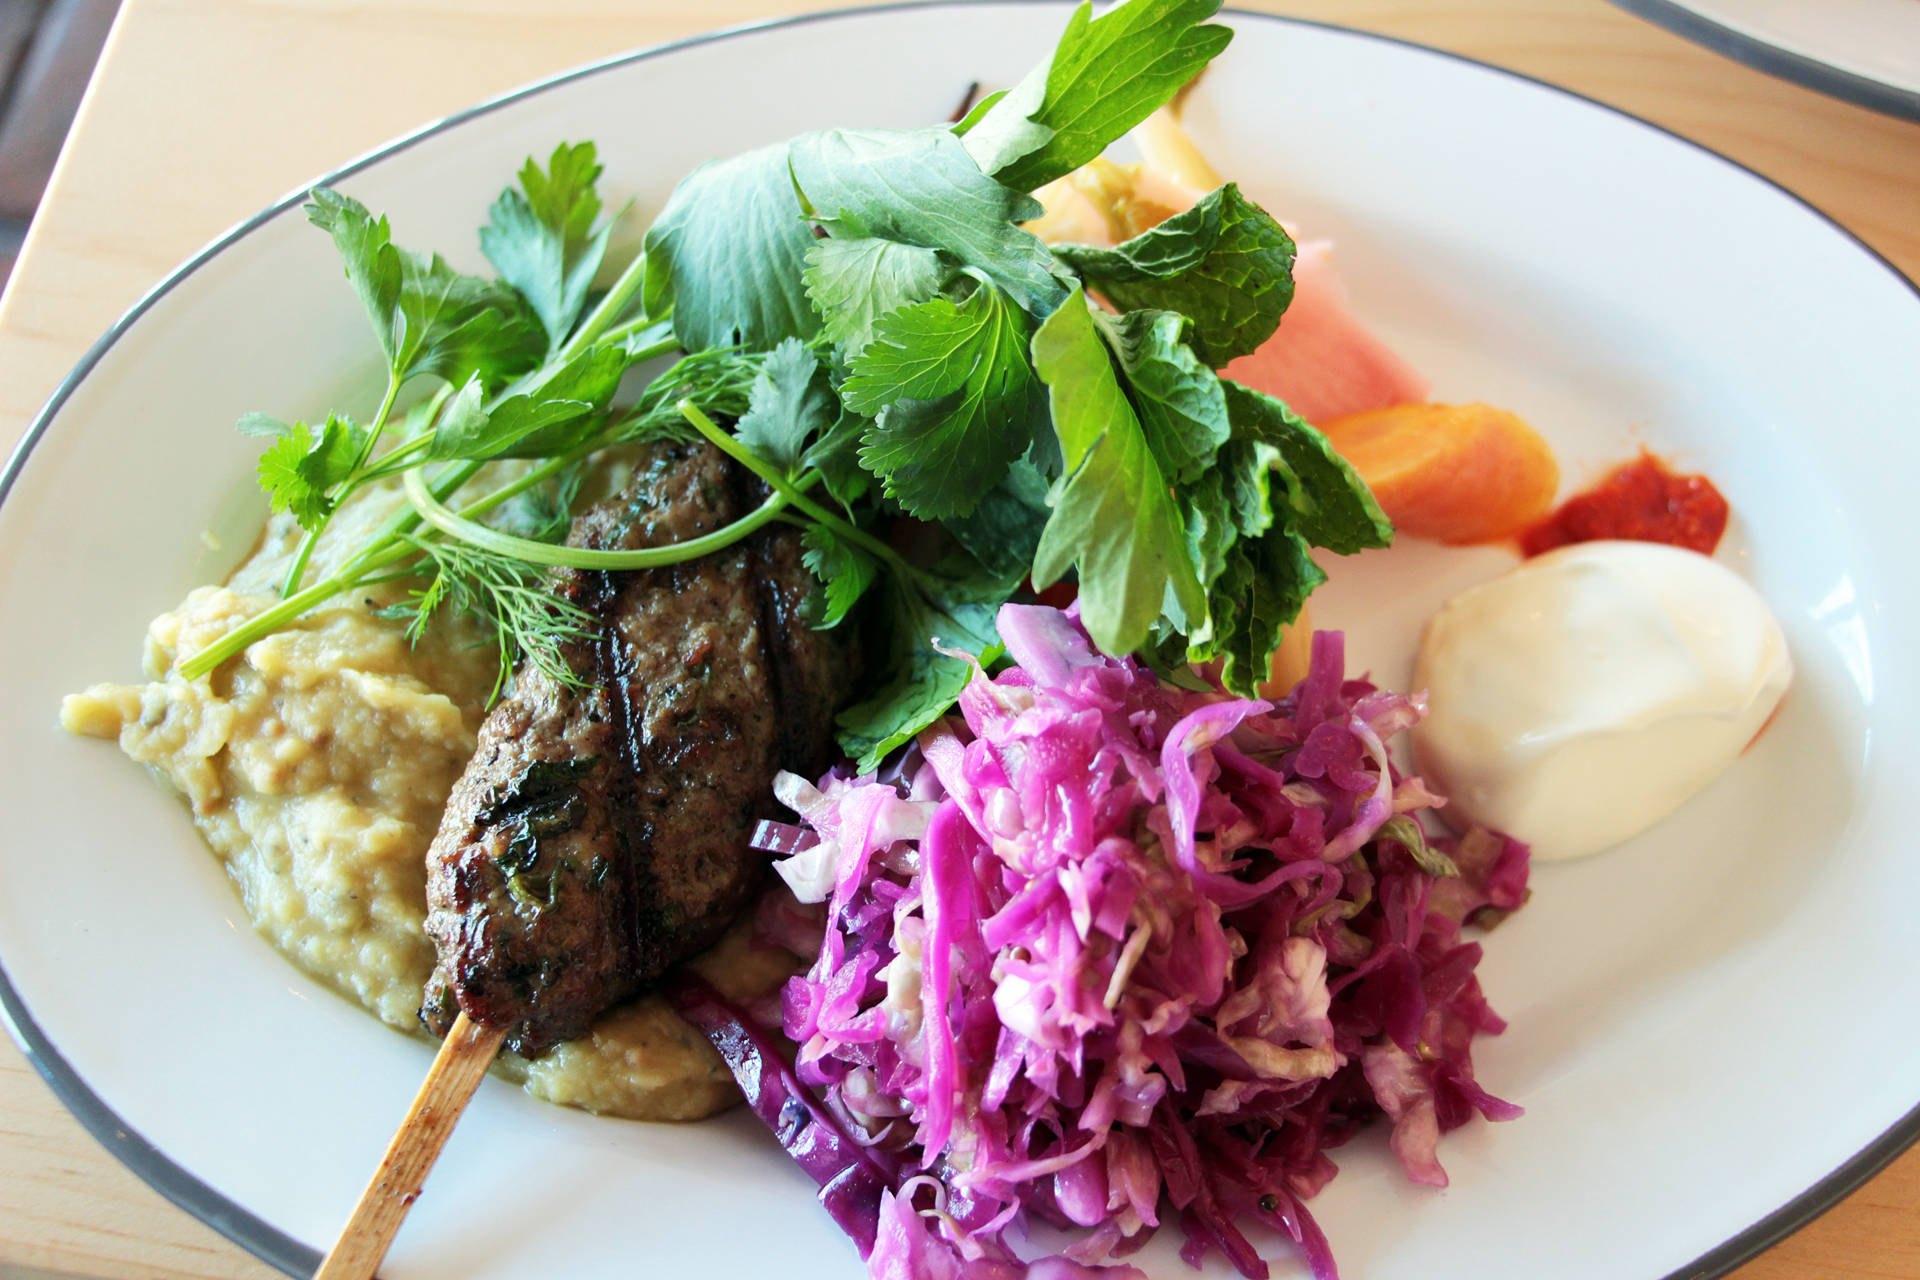 Lamb Kebab Plate with served with homemade purple-cabbage sauerkraut, mashed lentils, and pickles of fennel, carrot and celery.  Wendy Goodfriend